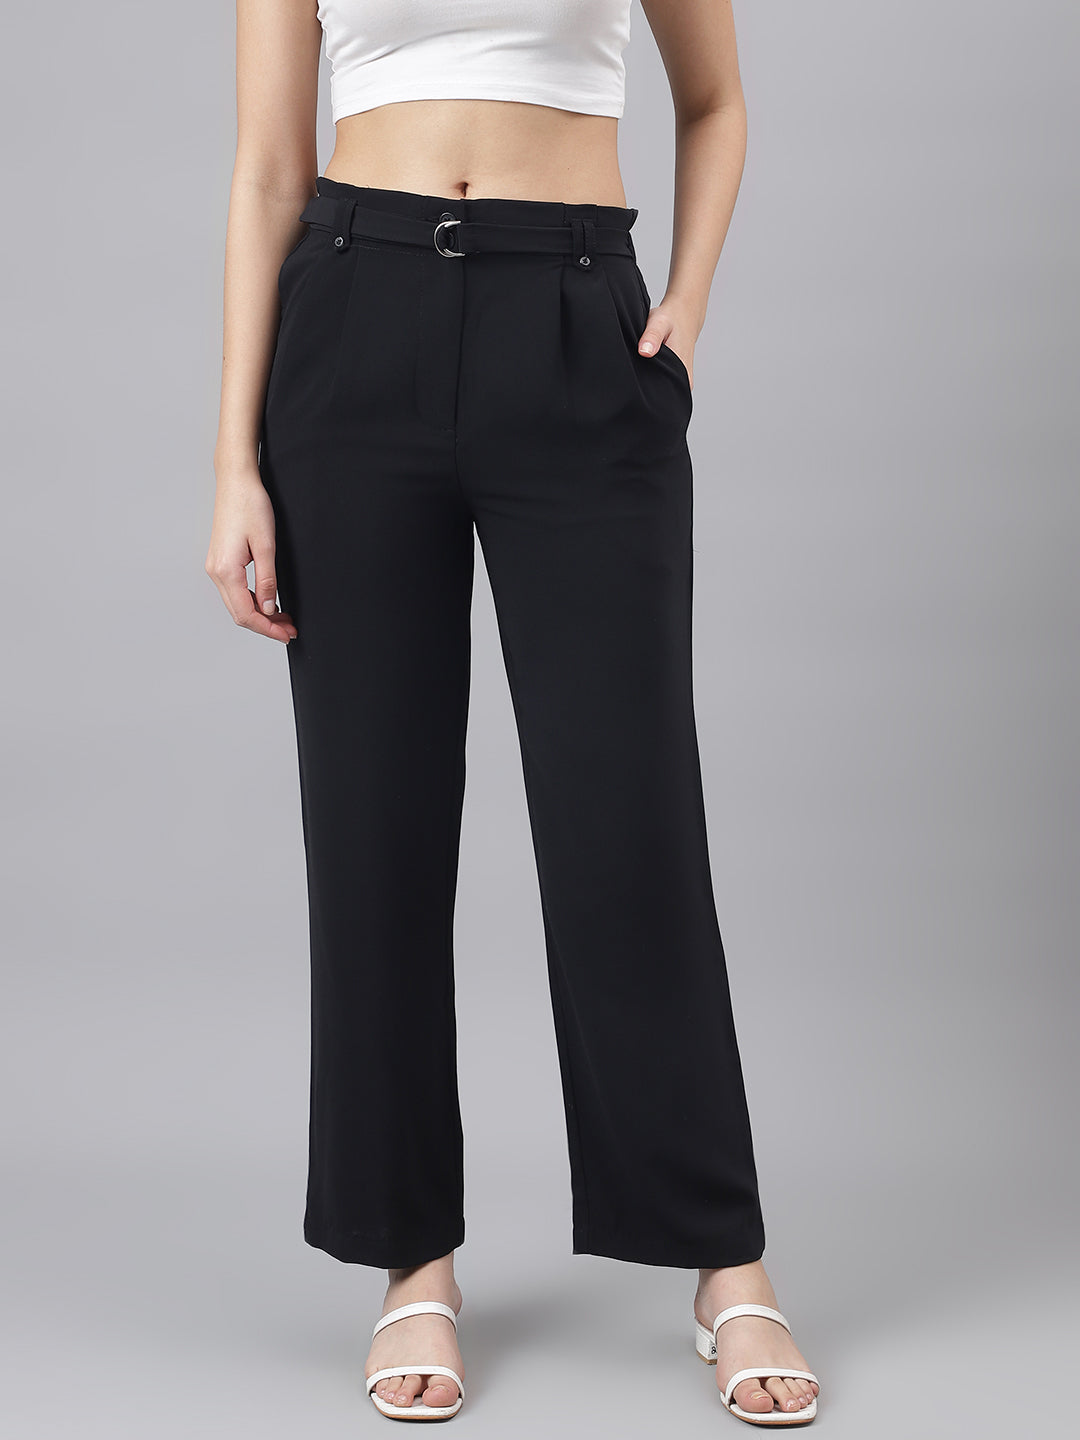 Women Black Mid-Rise Solid Trousers With 2 Pocket